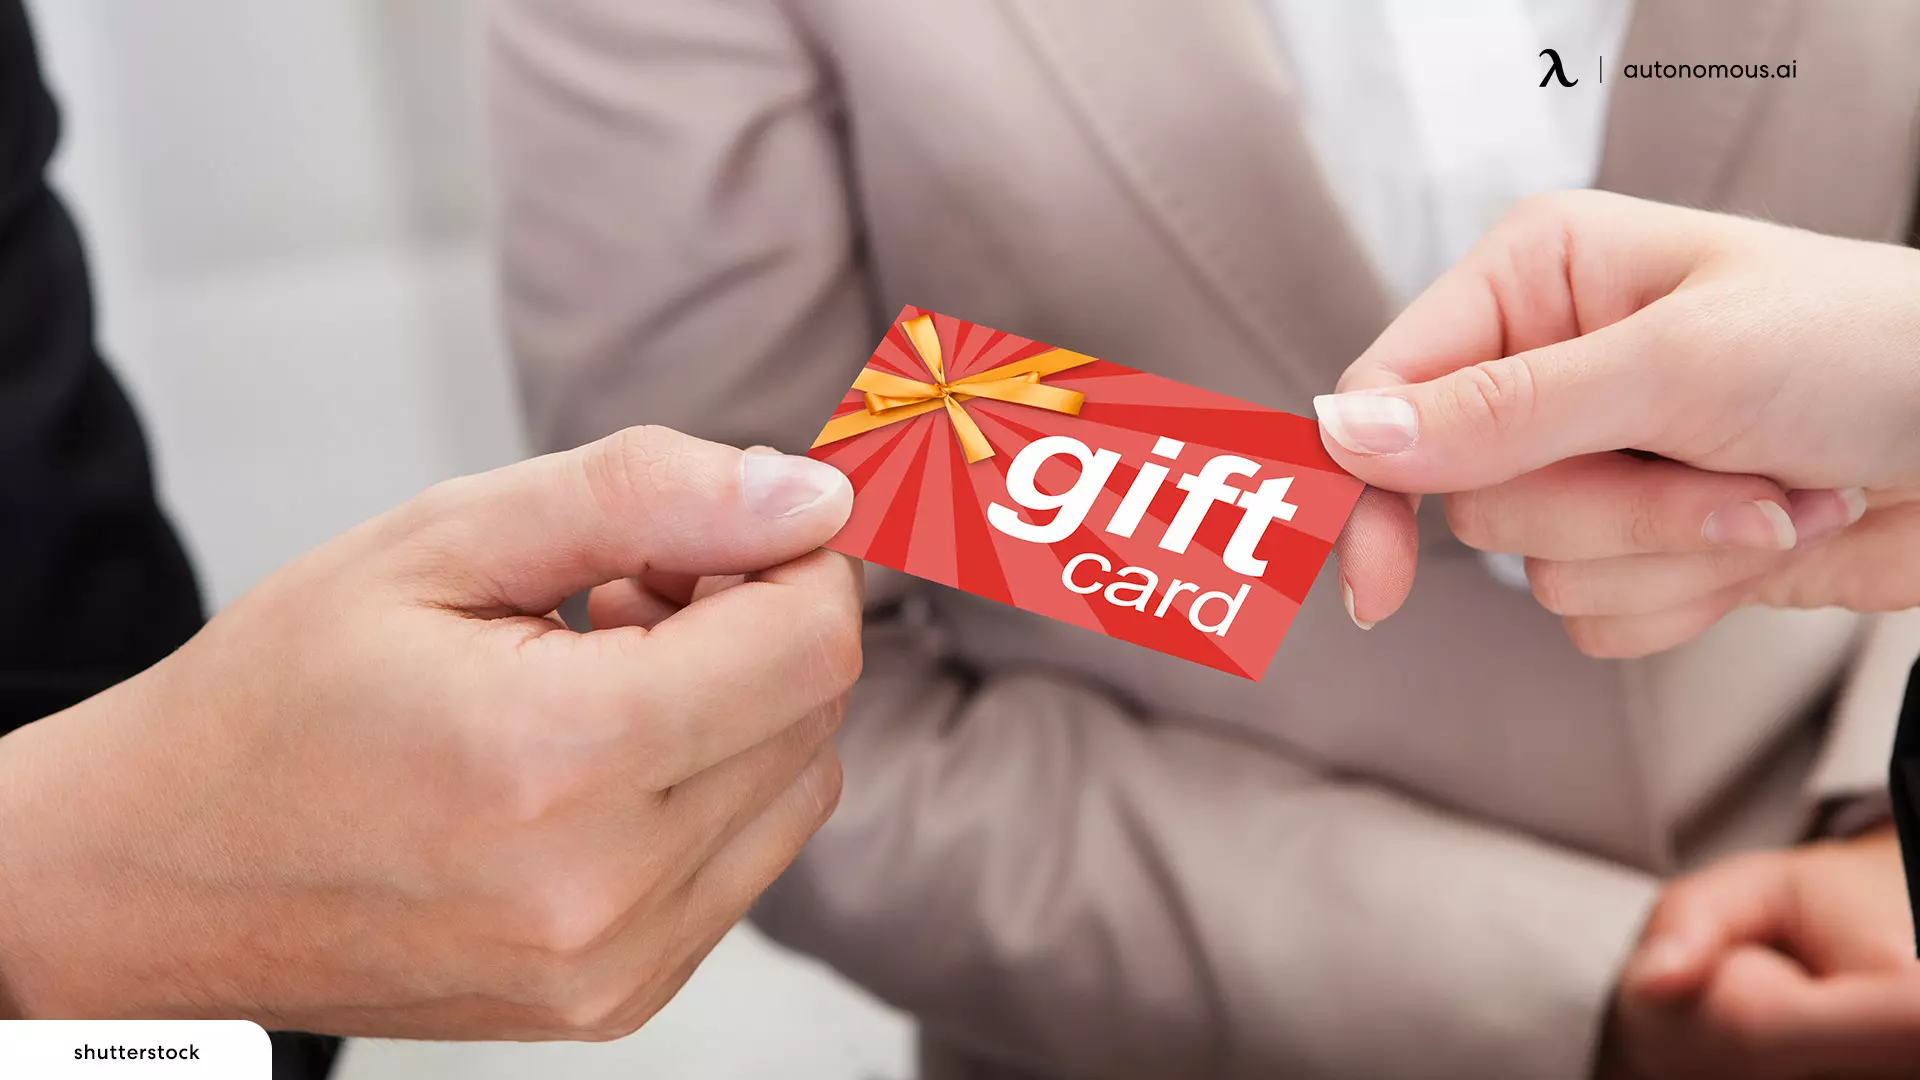 Gift Cards - inexpensive appreciation gifts for employees